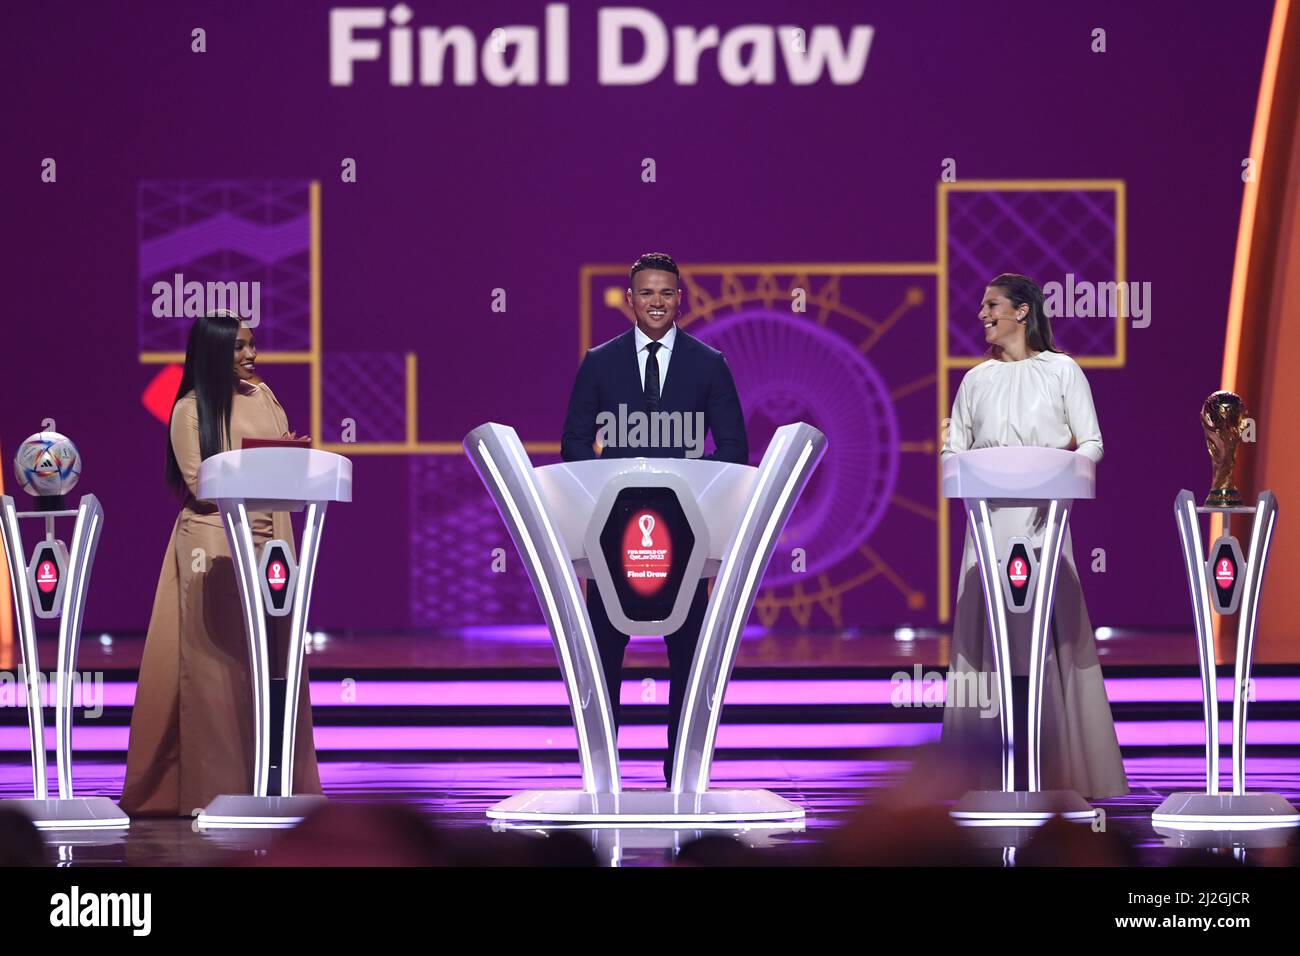 DOHA, QATAR - APRIL 01: Samantha Johnson (L),  Jermain Jenas (C) and Carli Lloyd (R) are seen on stage during the FIFA World Cup Qatar 2022 Final Draw at the Doha Exhibition Center on April 01, 2022 in Doha, Qatar. (Photo by Michael Regan/FIFA/Sipa USA)*** For Editorial Use Only *** Not to be Published in Books or Photo Books *** Handling Fee Only ***   Please note: Fees charged by the agency are for the agency's services only, and do not, nor are they intended to, convey to the user any ownership of Copyright in the material. You are only obtaining access to the agency’s digital copy and are Stock Photo